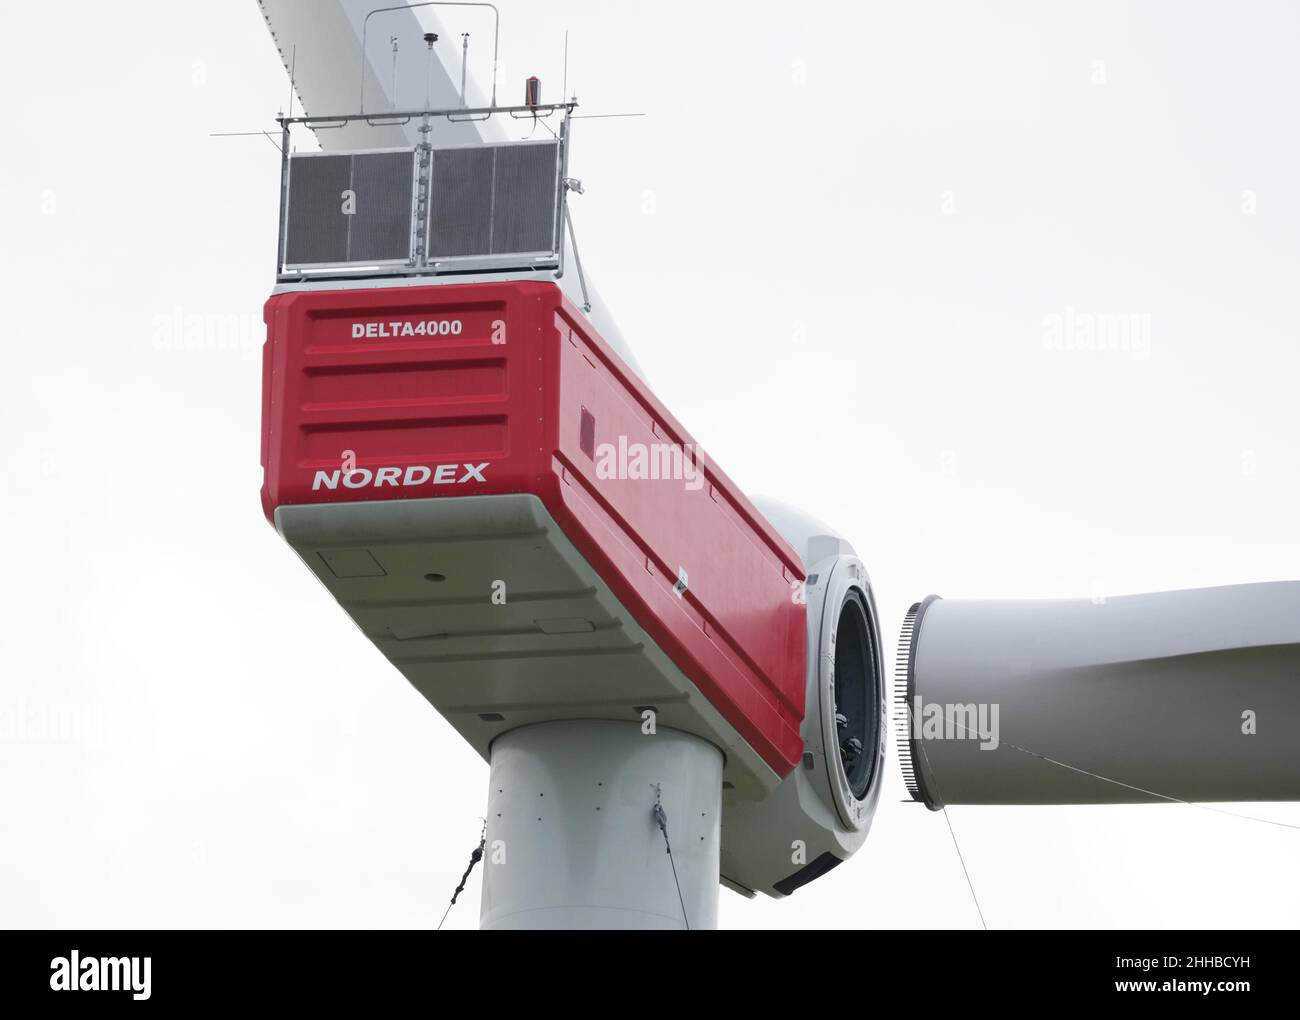 22 January 2022, Brandenburg, Großbeeren: A crane lifts up a rotor blade for one of the new wind turbines at the construction site of the Berlin municipal utility near Sputendorf. A total of three wind turbines from German manufacturer Nordex are being erected on land owned by Berlin's municipal utilities, among others. They measure 180 meters to the blade tip, with the rotor blades attached to the tower tip at 105 meters covering a diameter of 149 meters. Compared with many turbines built to date, this means a rotor diameter that is around 30 meters larger, with a height of around 20 meters l Stock Photo